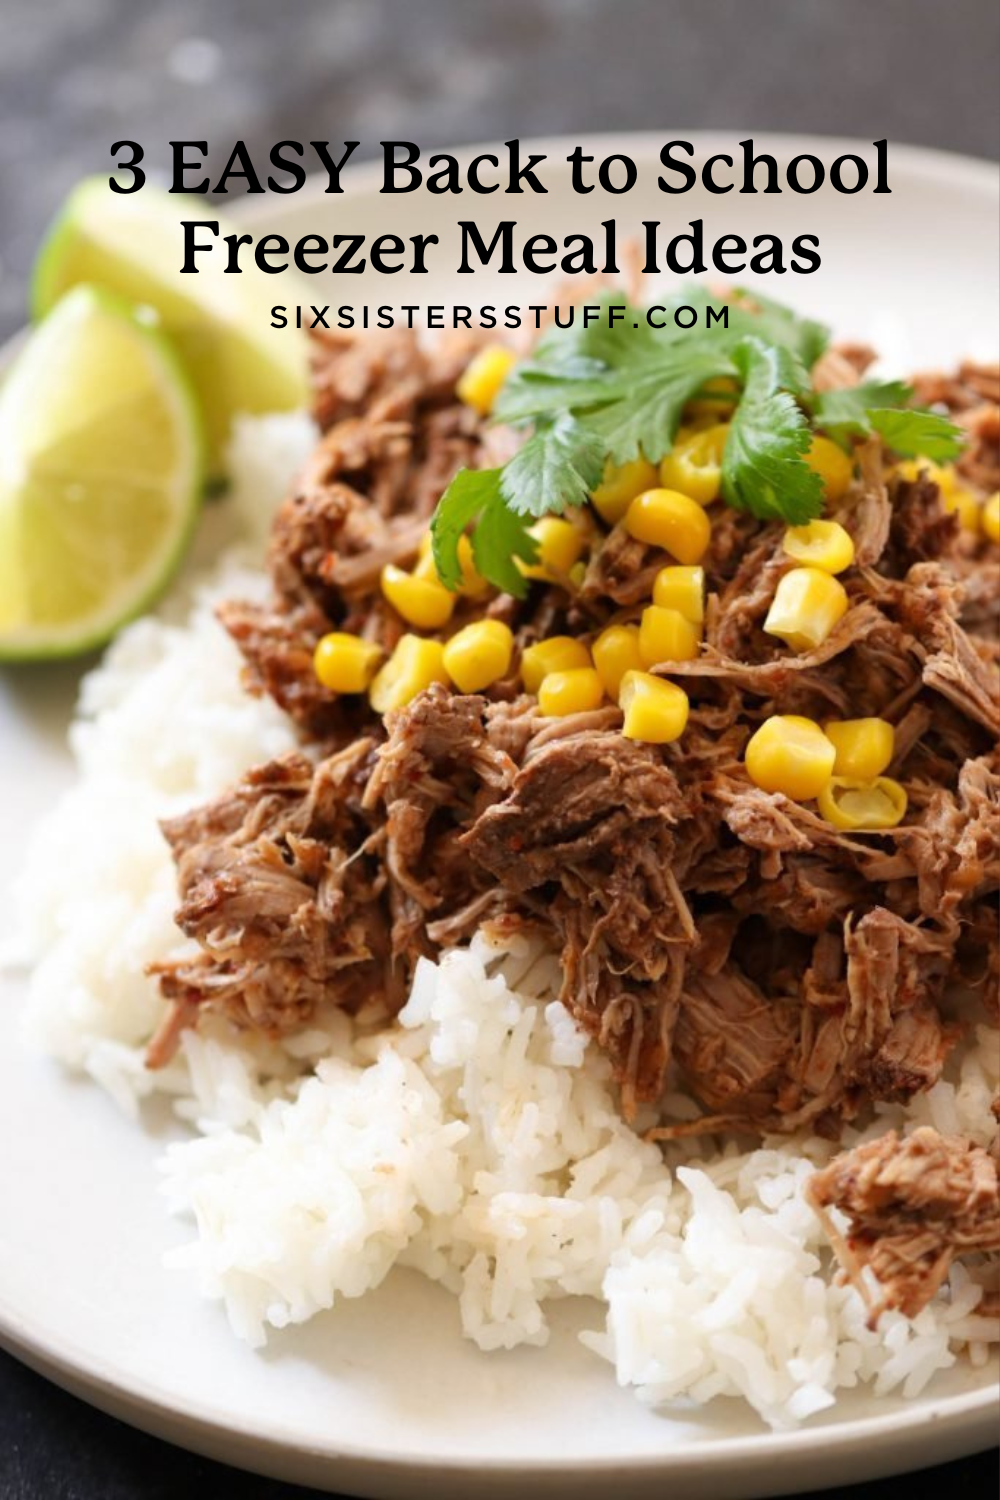 3 EASY Back to School Freezer Meal Ideas – Instant Pot or Slow Cooker